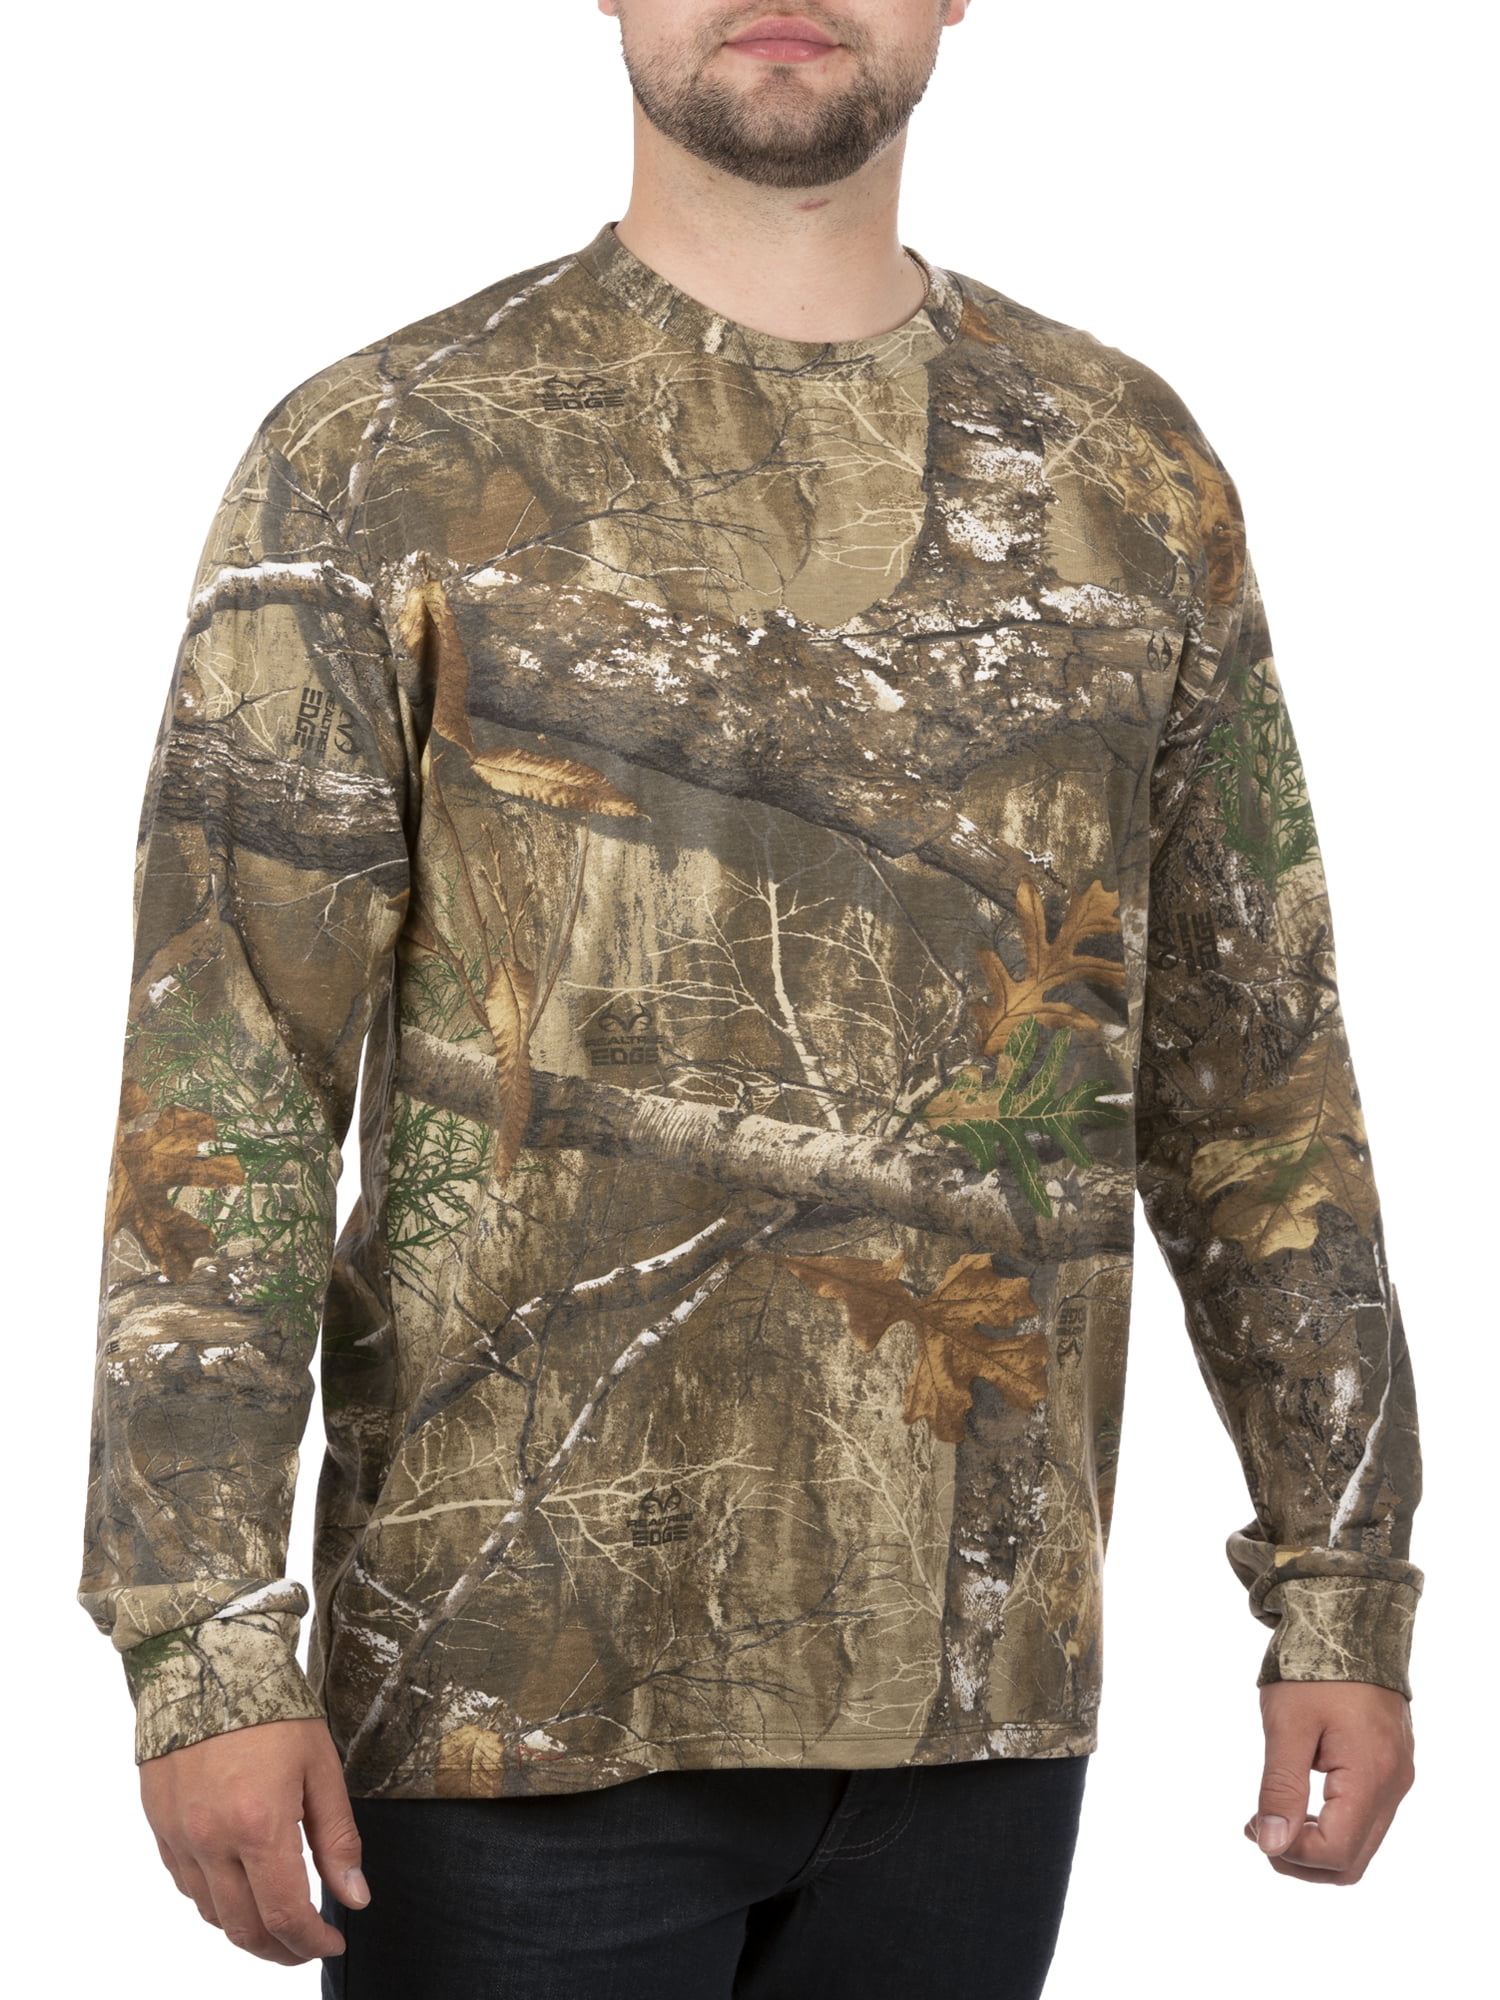 NEW Mens Scent Control RealTree EDGE Camo Long Sleeve Tee Shirt UVF INSECT Repel 